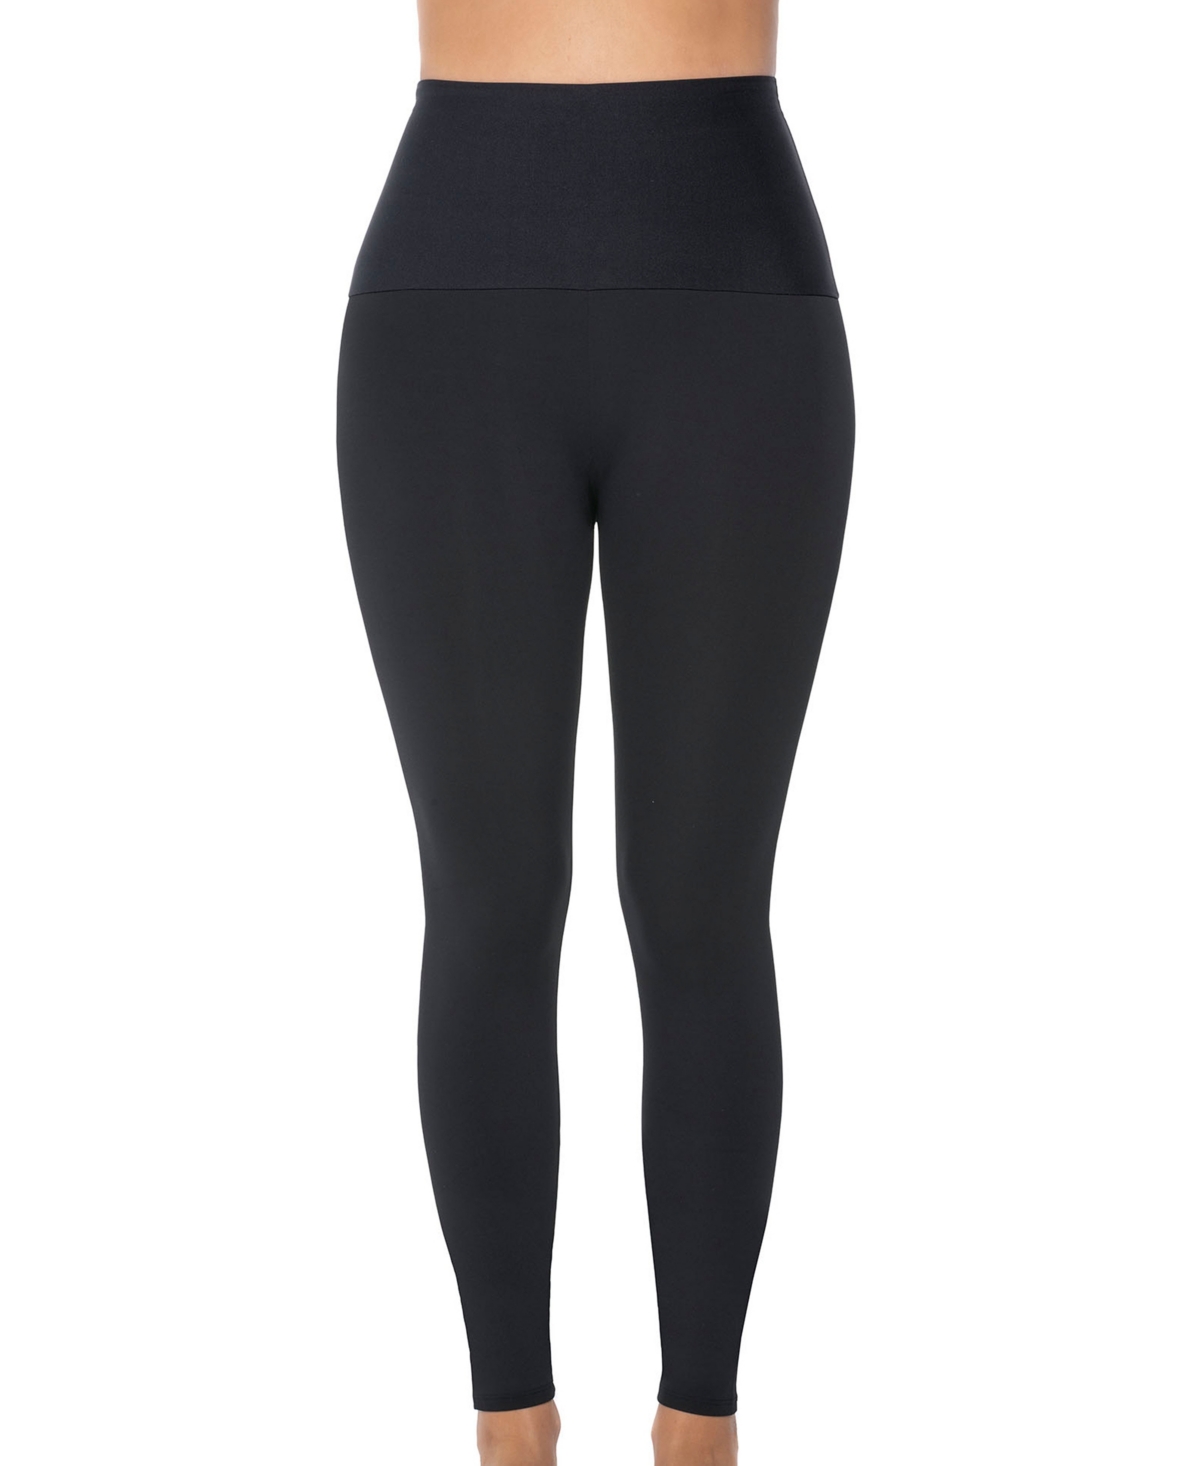 Activelife Power Move Moderate Compression Mid-Rise Athletic Legging - Black